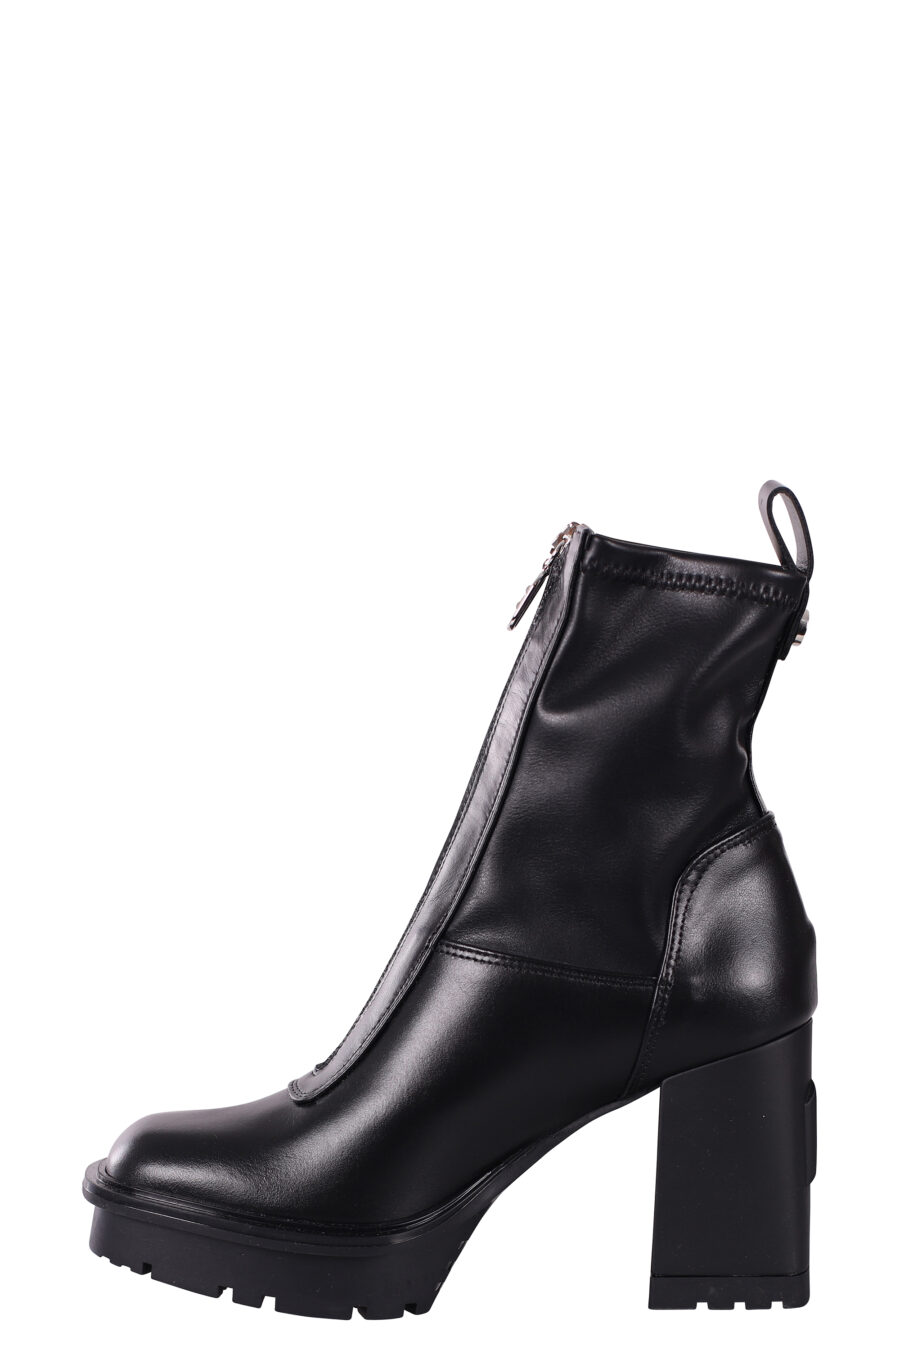 Black sock ankle boots with heel and platform - IMG 5813